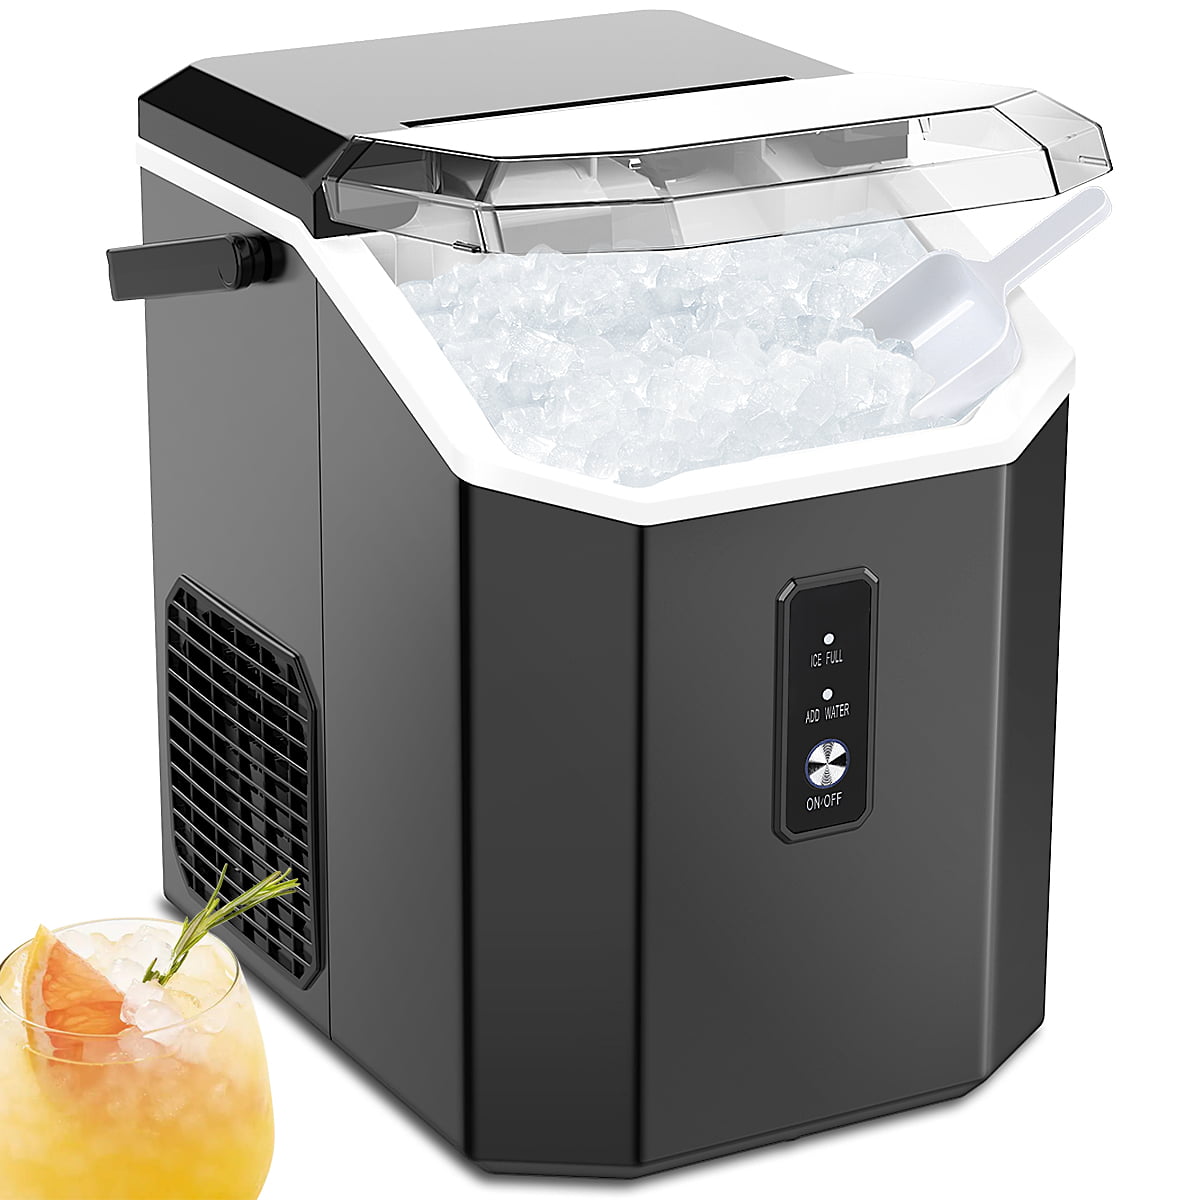 Kndko 33lbs Chewable Nugget Ice Maker with Crushed Ice, Ready in 7 Mins, Sonic Ice Machine with Handle, Black